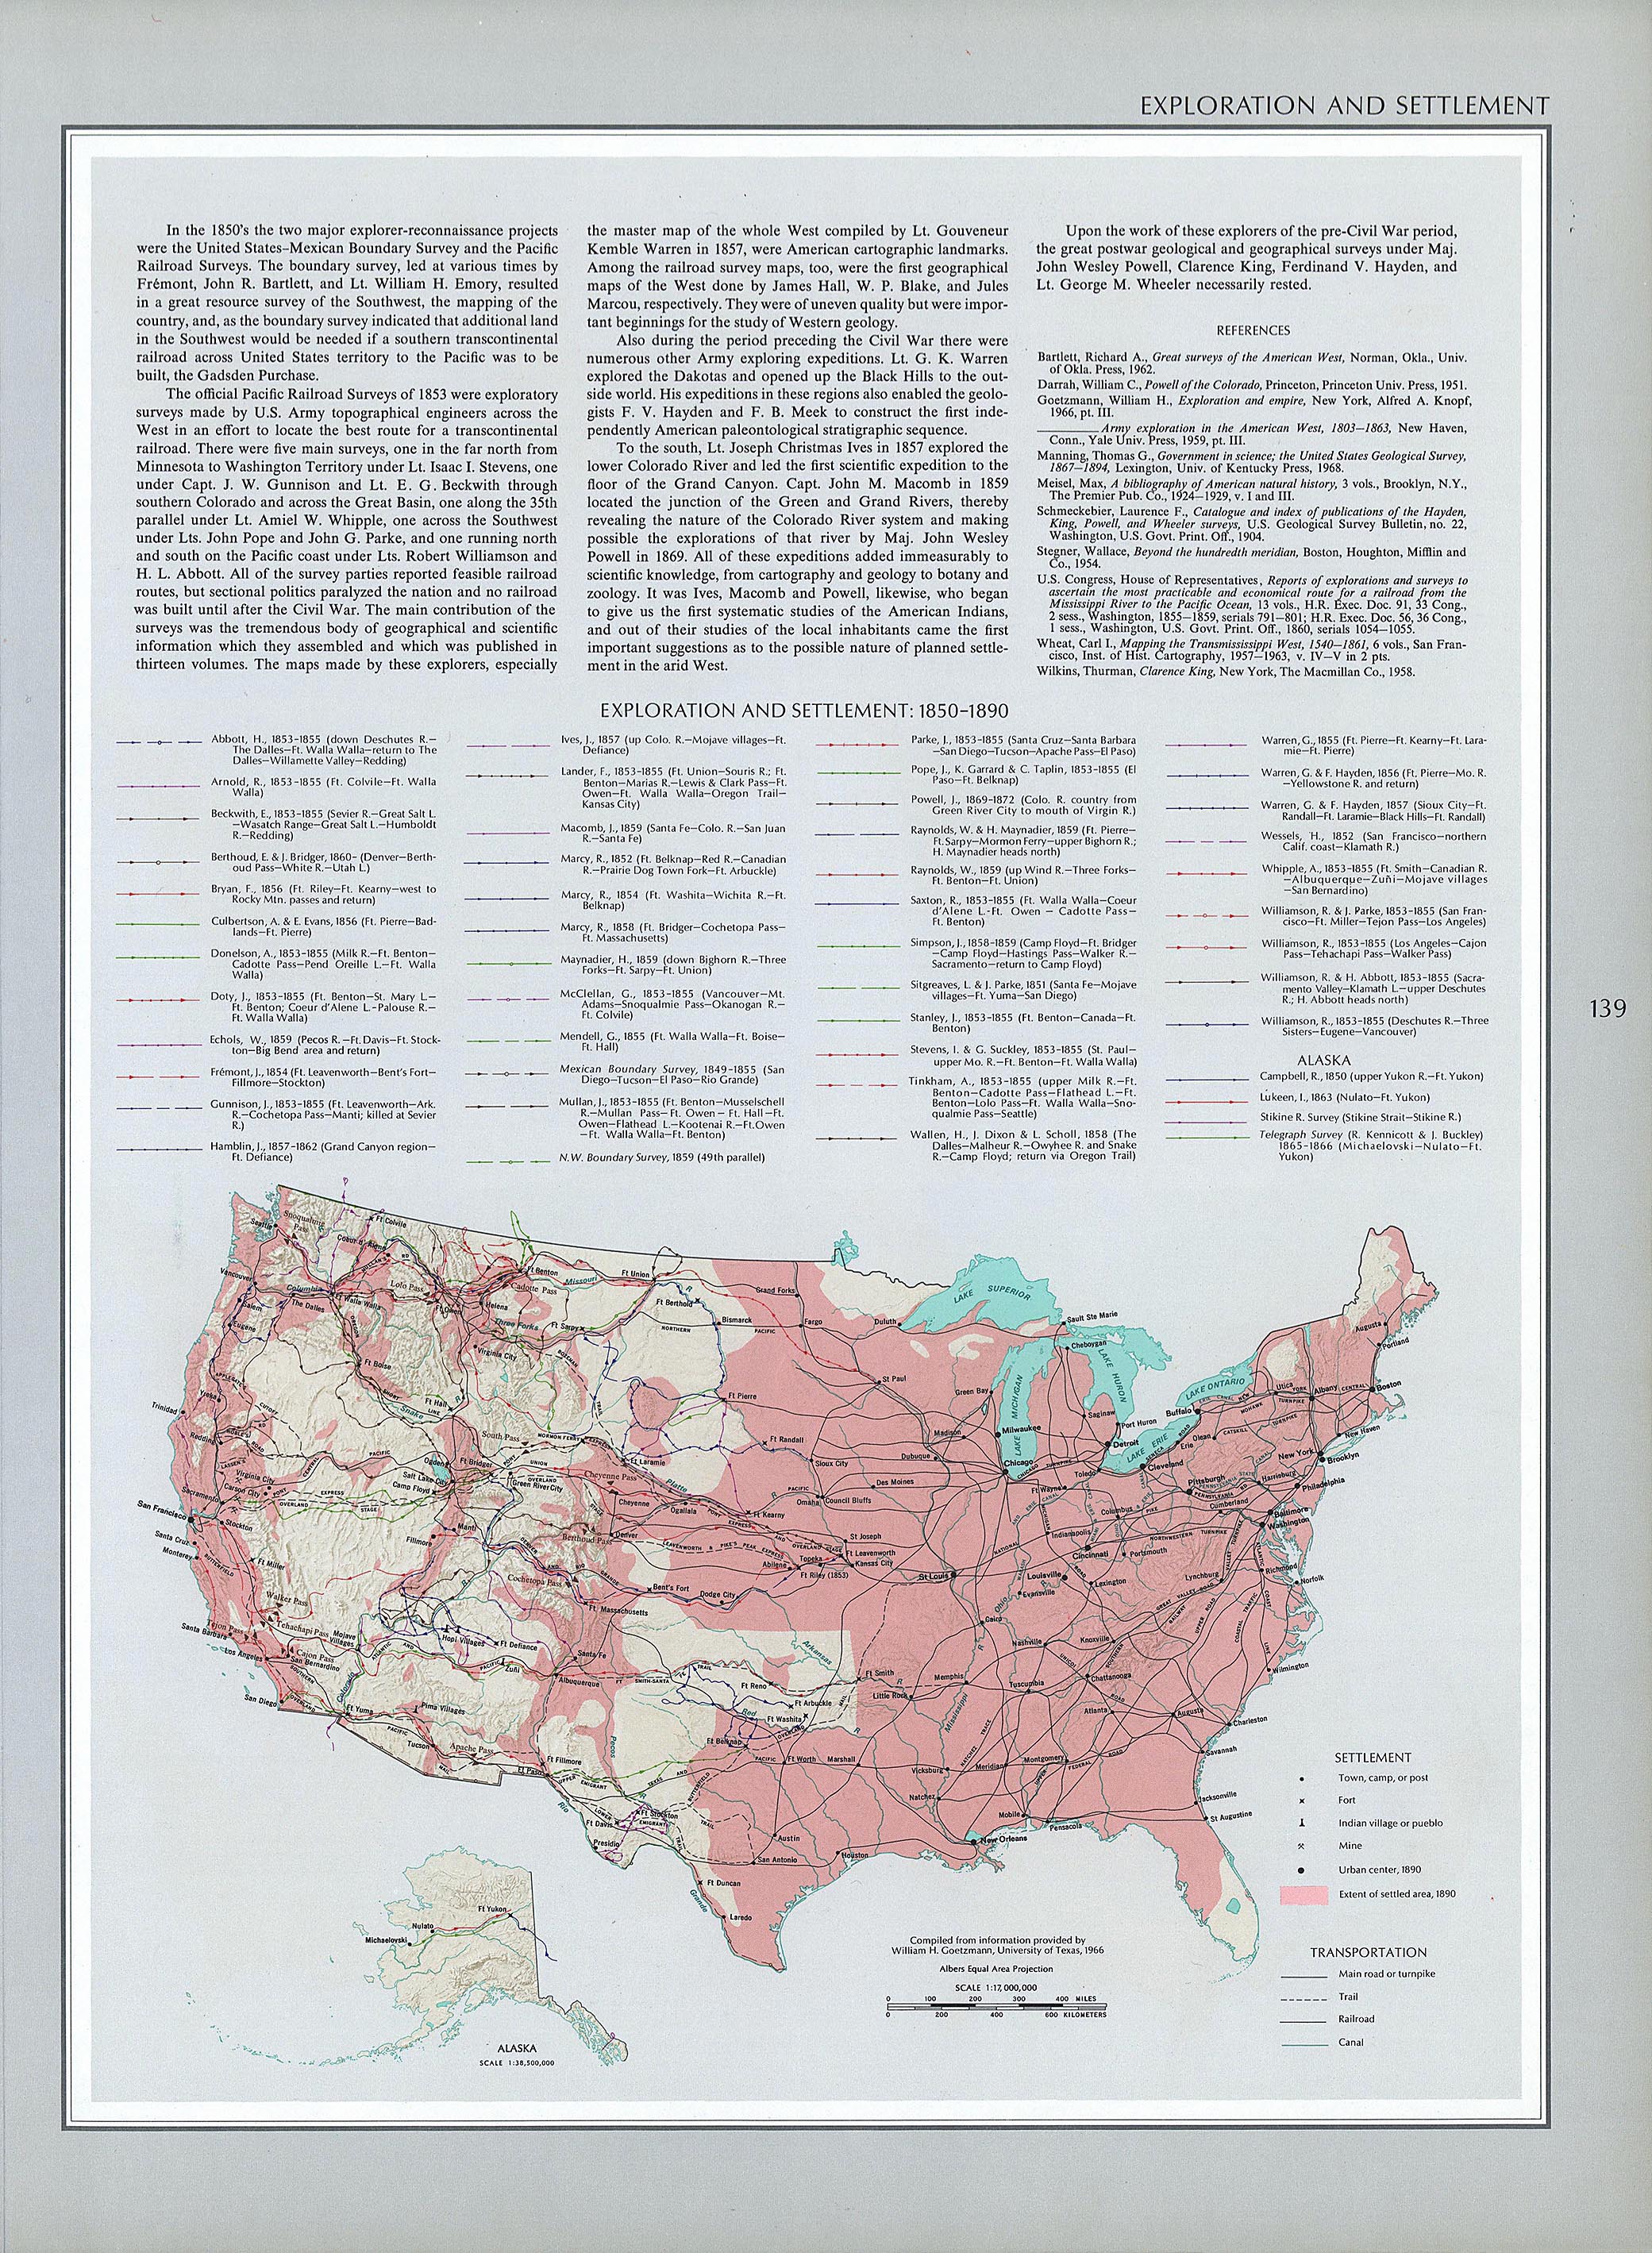 Historical Maps of United States. Exploration and Settlement 1850-1890 (888K) 